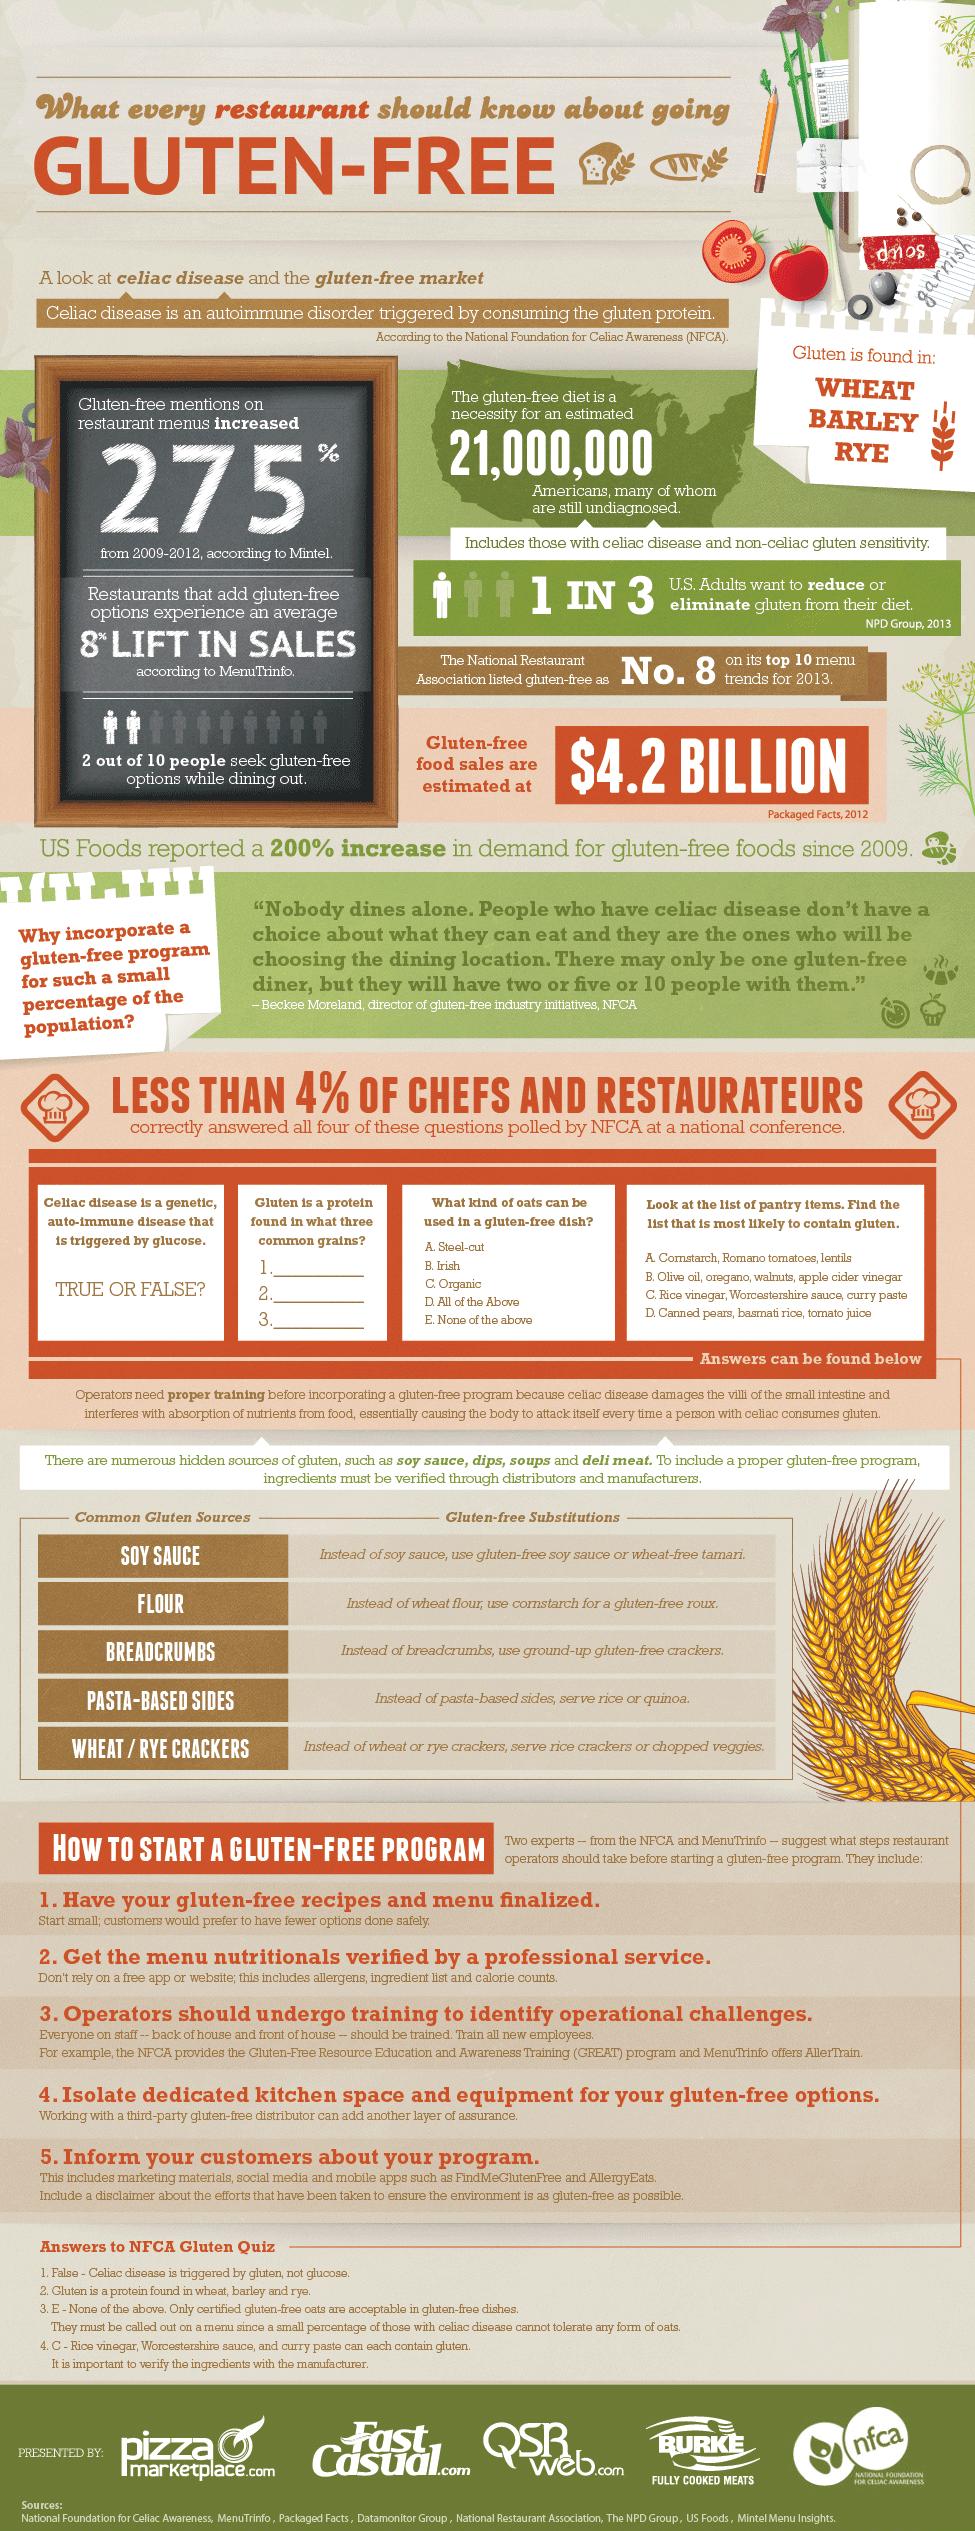 What every restaurant operator should know about going gluten-free [Infographic]